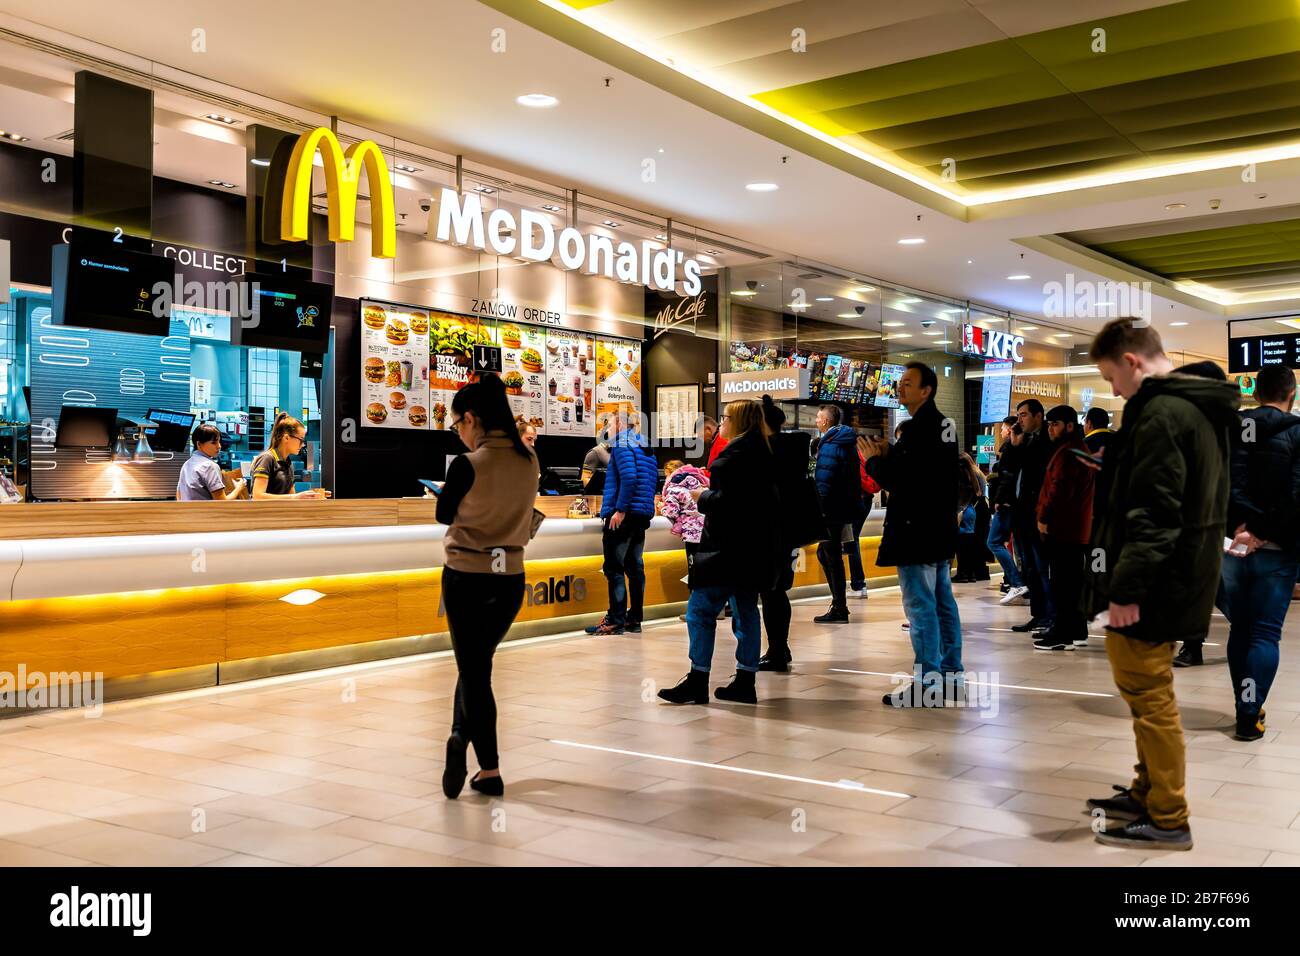 Warsaw, Poland - December 23, 2019: Food court with people standing waiting in line for McDonald's and KFC Kentucky Fried Chicken fast food chain rest Stock Photo